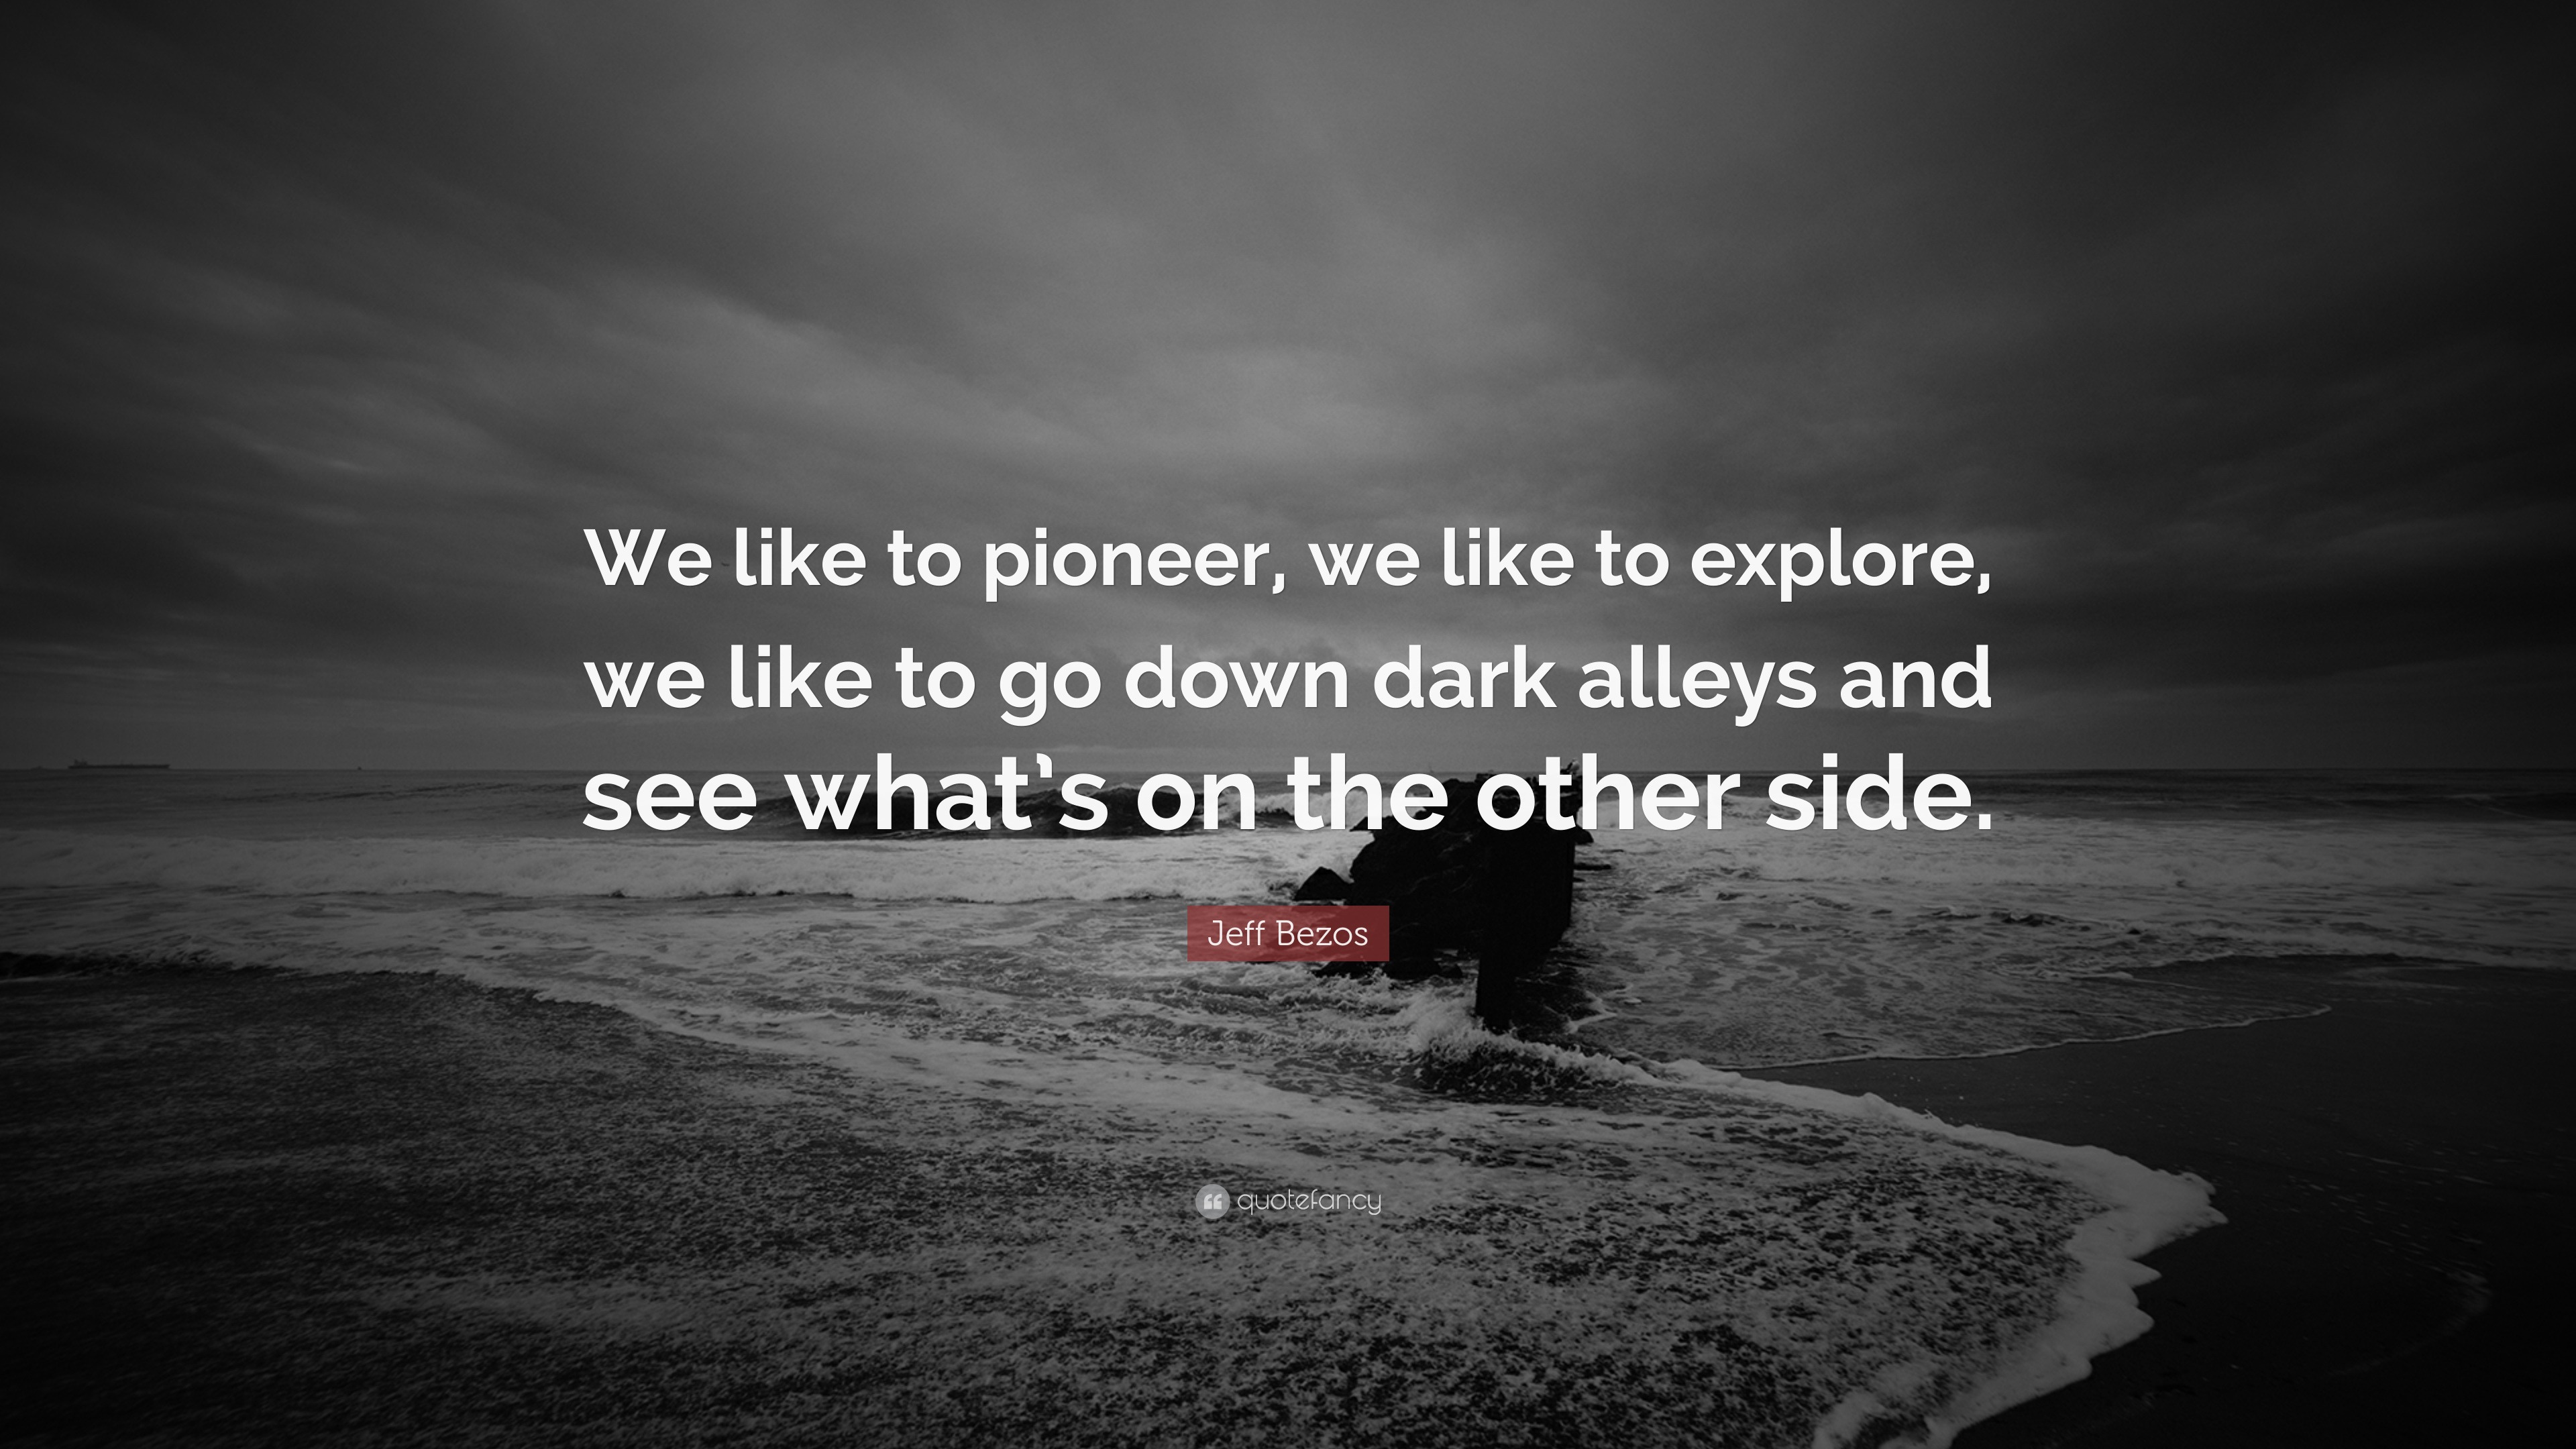 Jeff Bezos Quote: "We like to pioneer, we like to explore, we like to go down dark alleys and ...